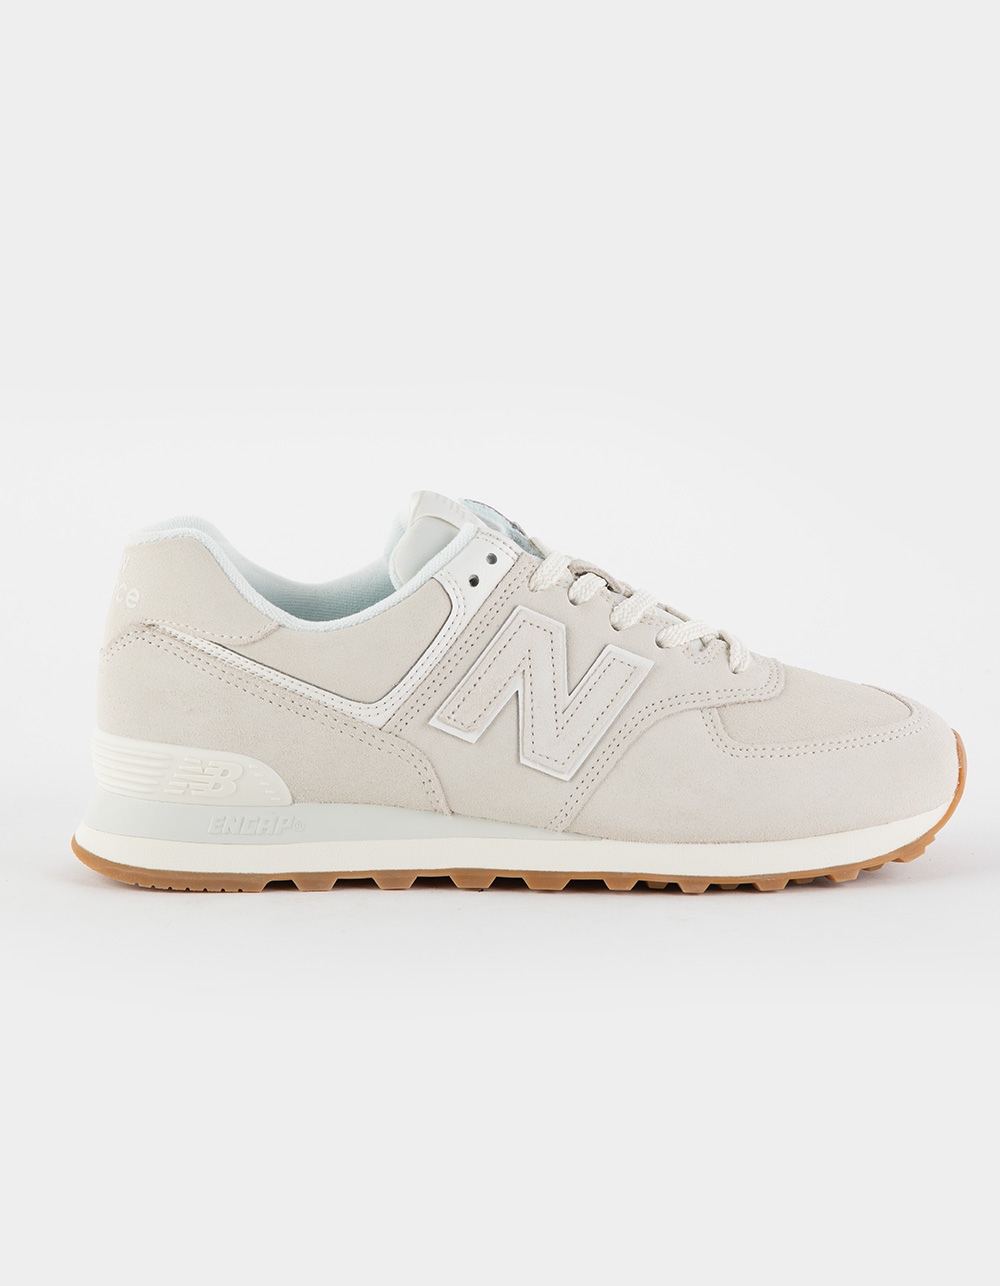 NEW BALANCE 574 Shoes - OFF WHITE | Tillys